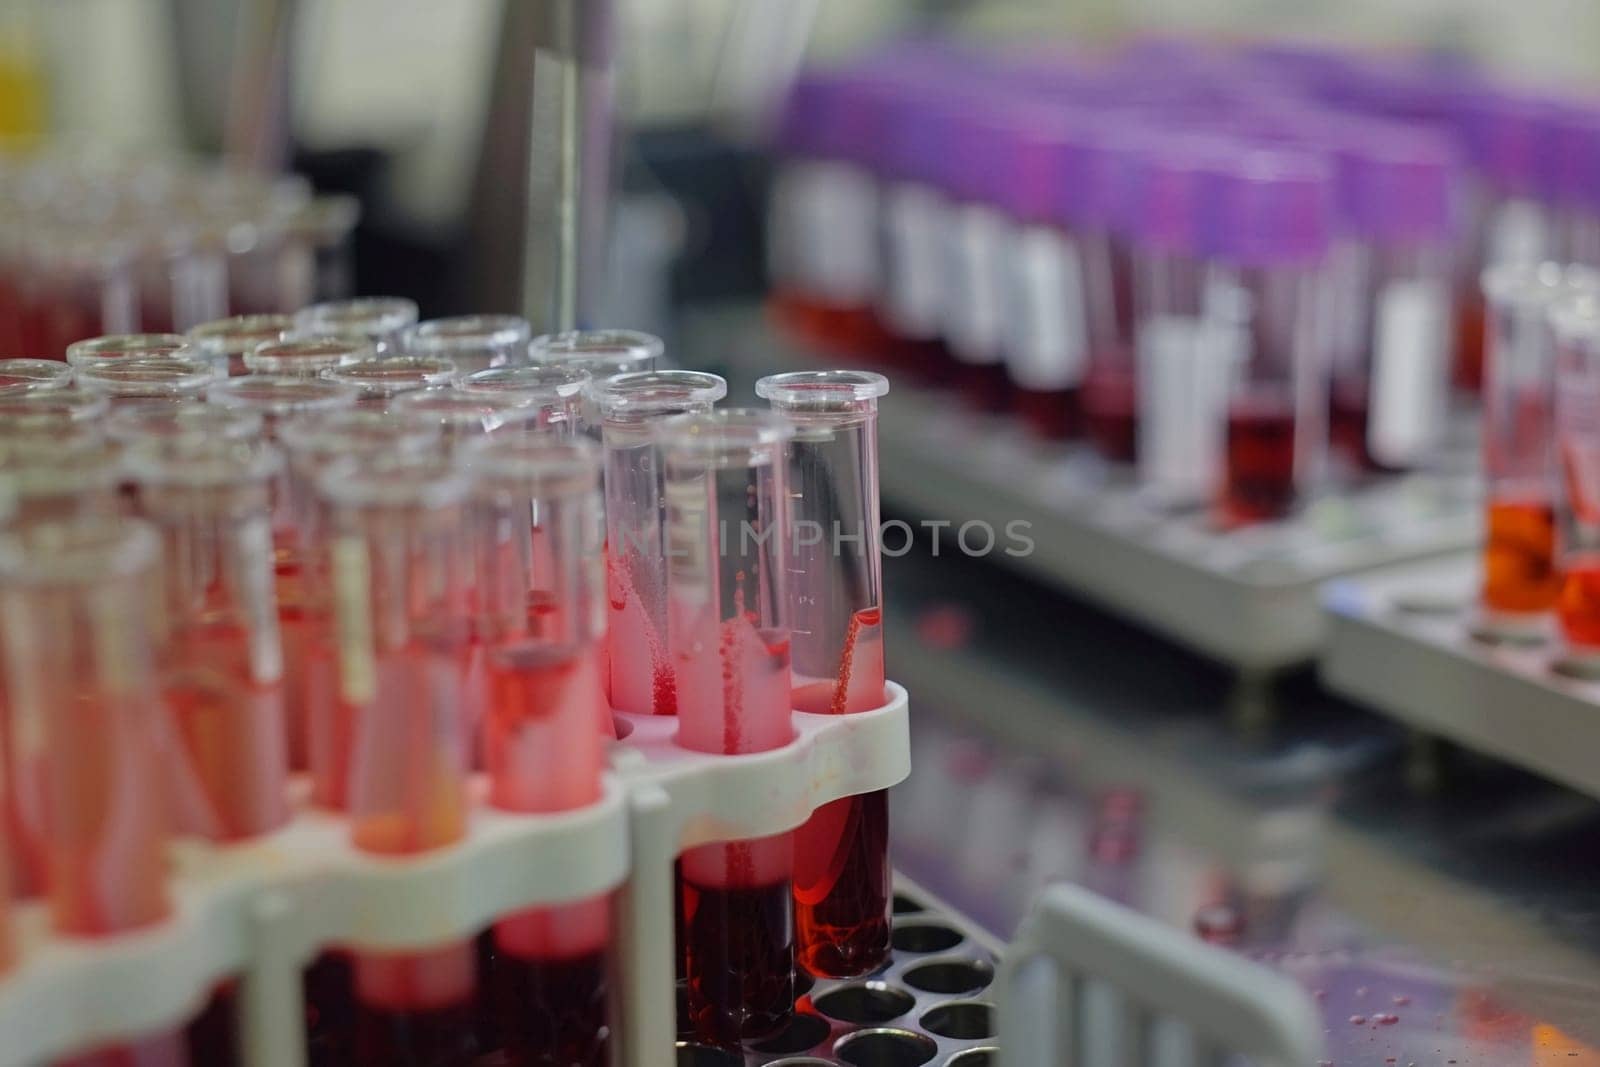 A close-up view of multiple blood-filled test tubes organized in a laboratory rack, representing medical testing, research, and analysis.